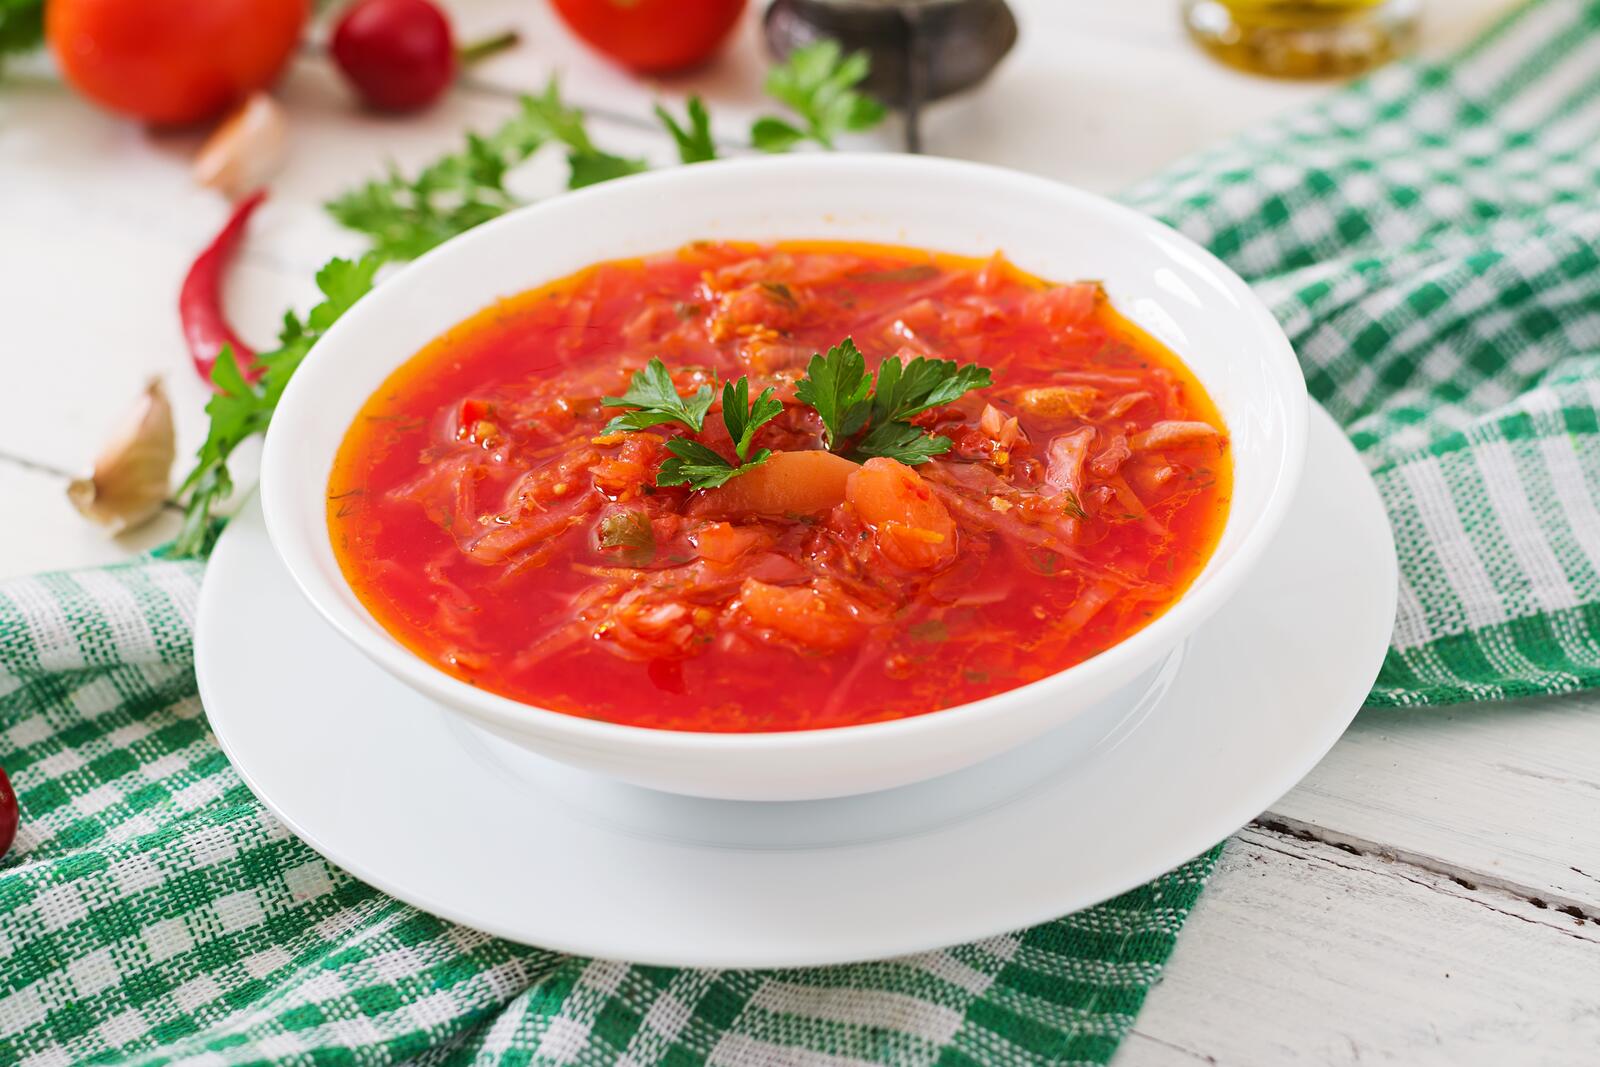 Free photo Red soup with vegetables in a white plate with a saucer